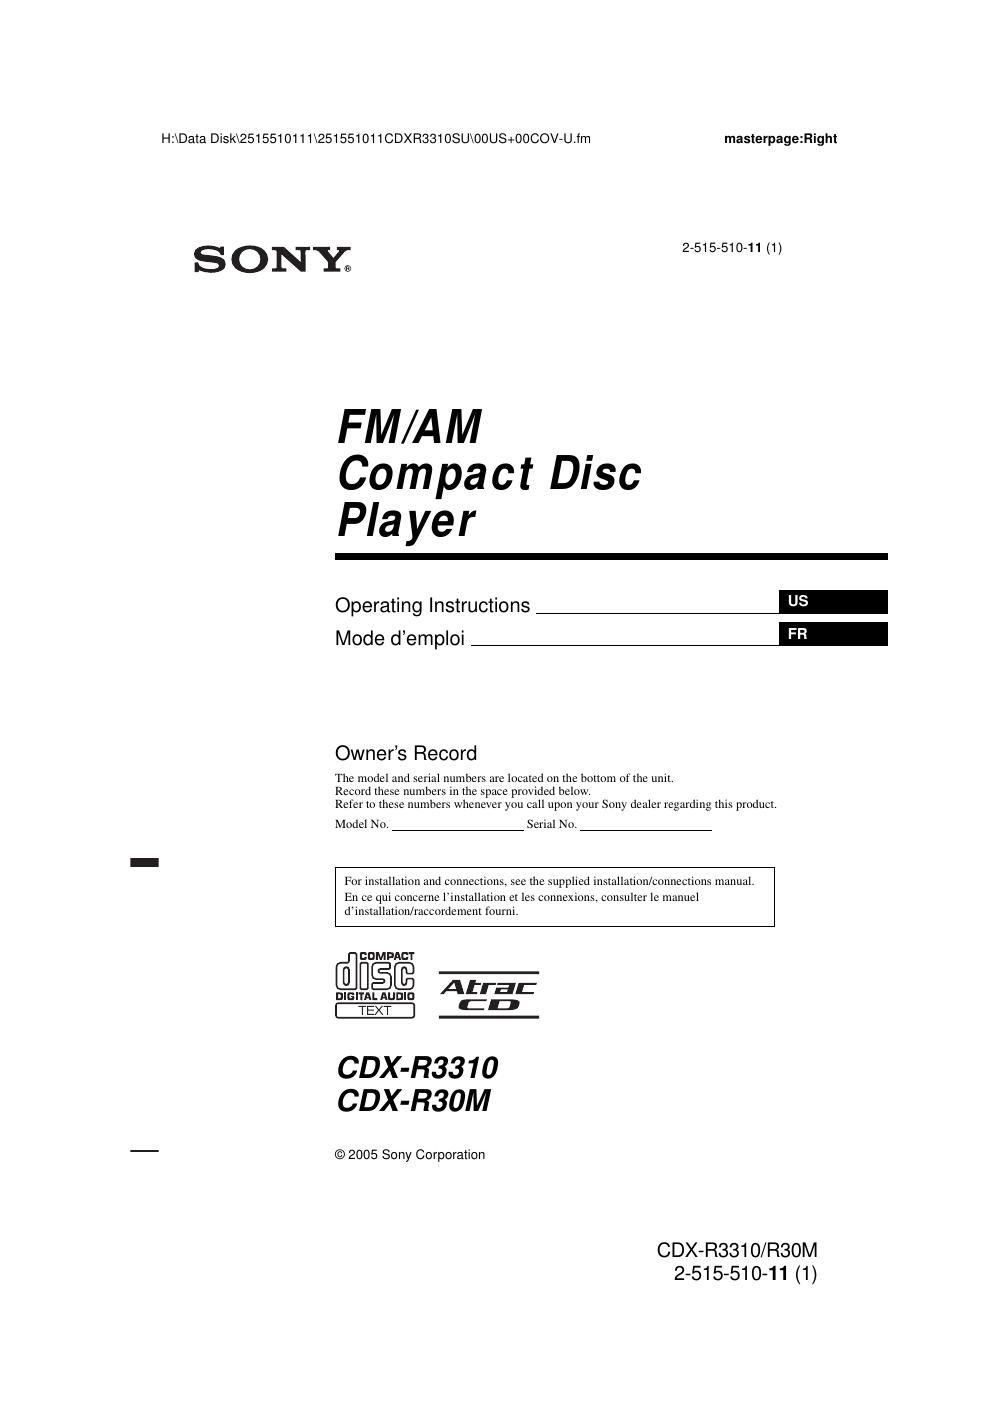 sony cdx r 30 m owners manual